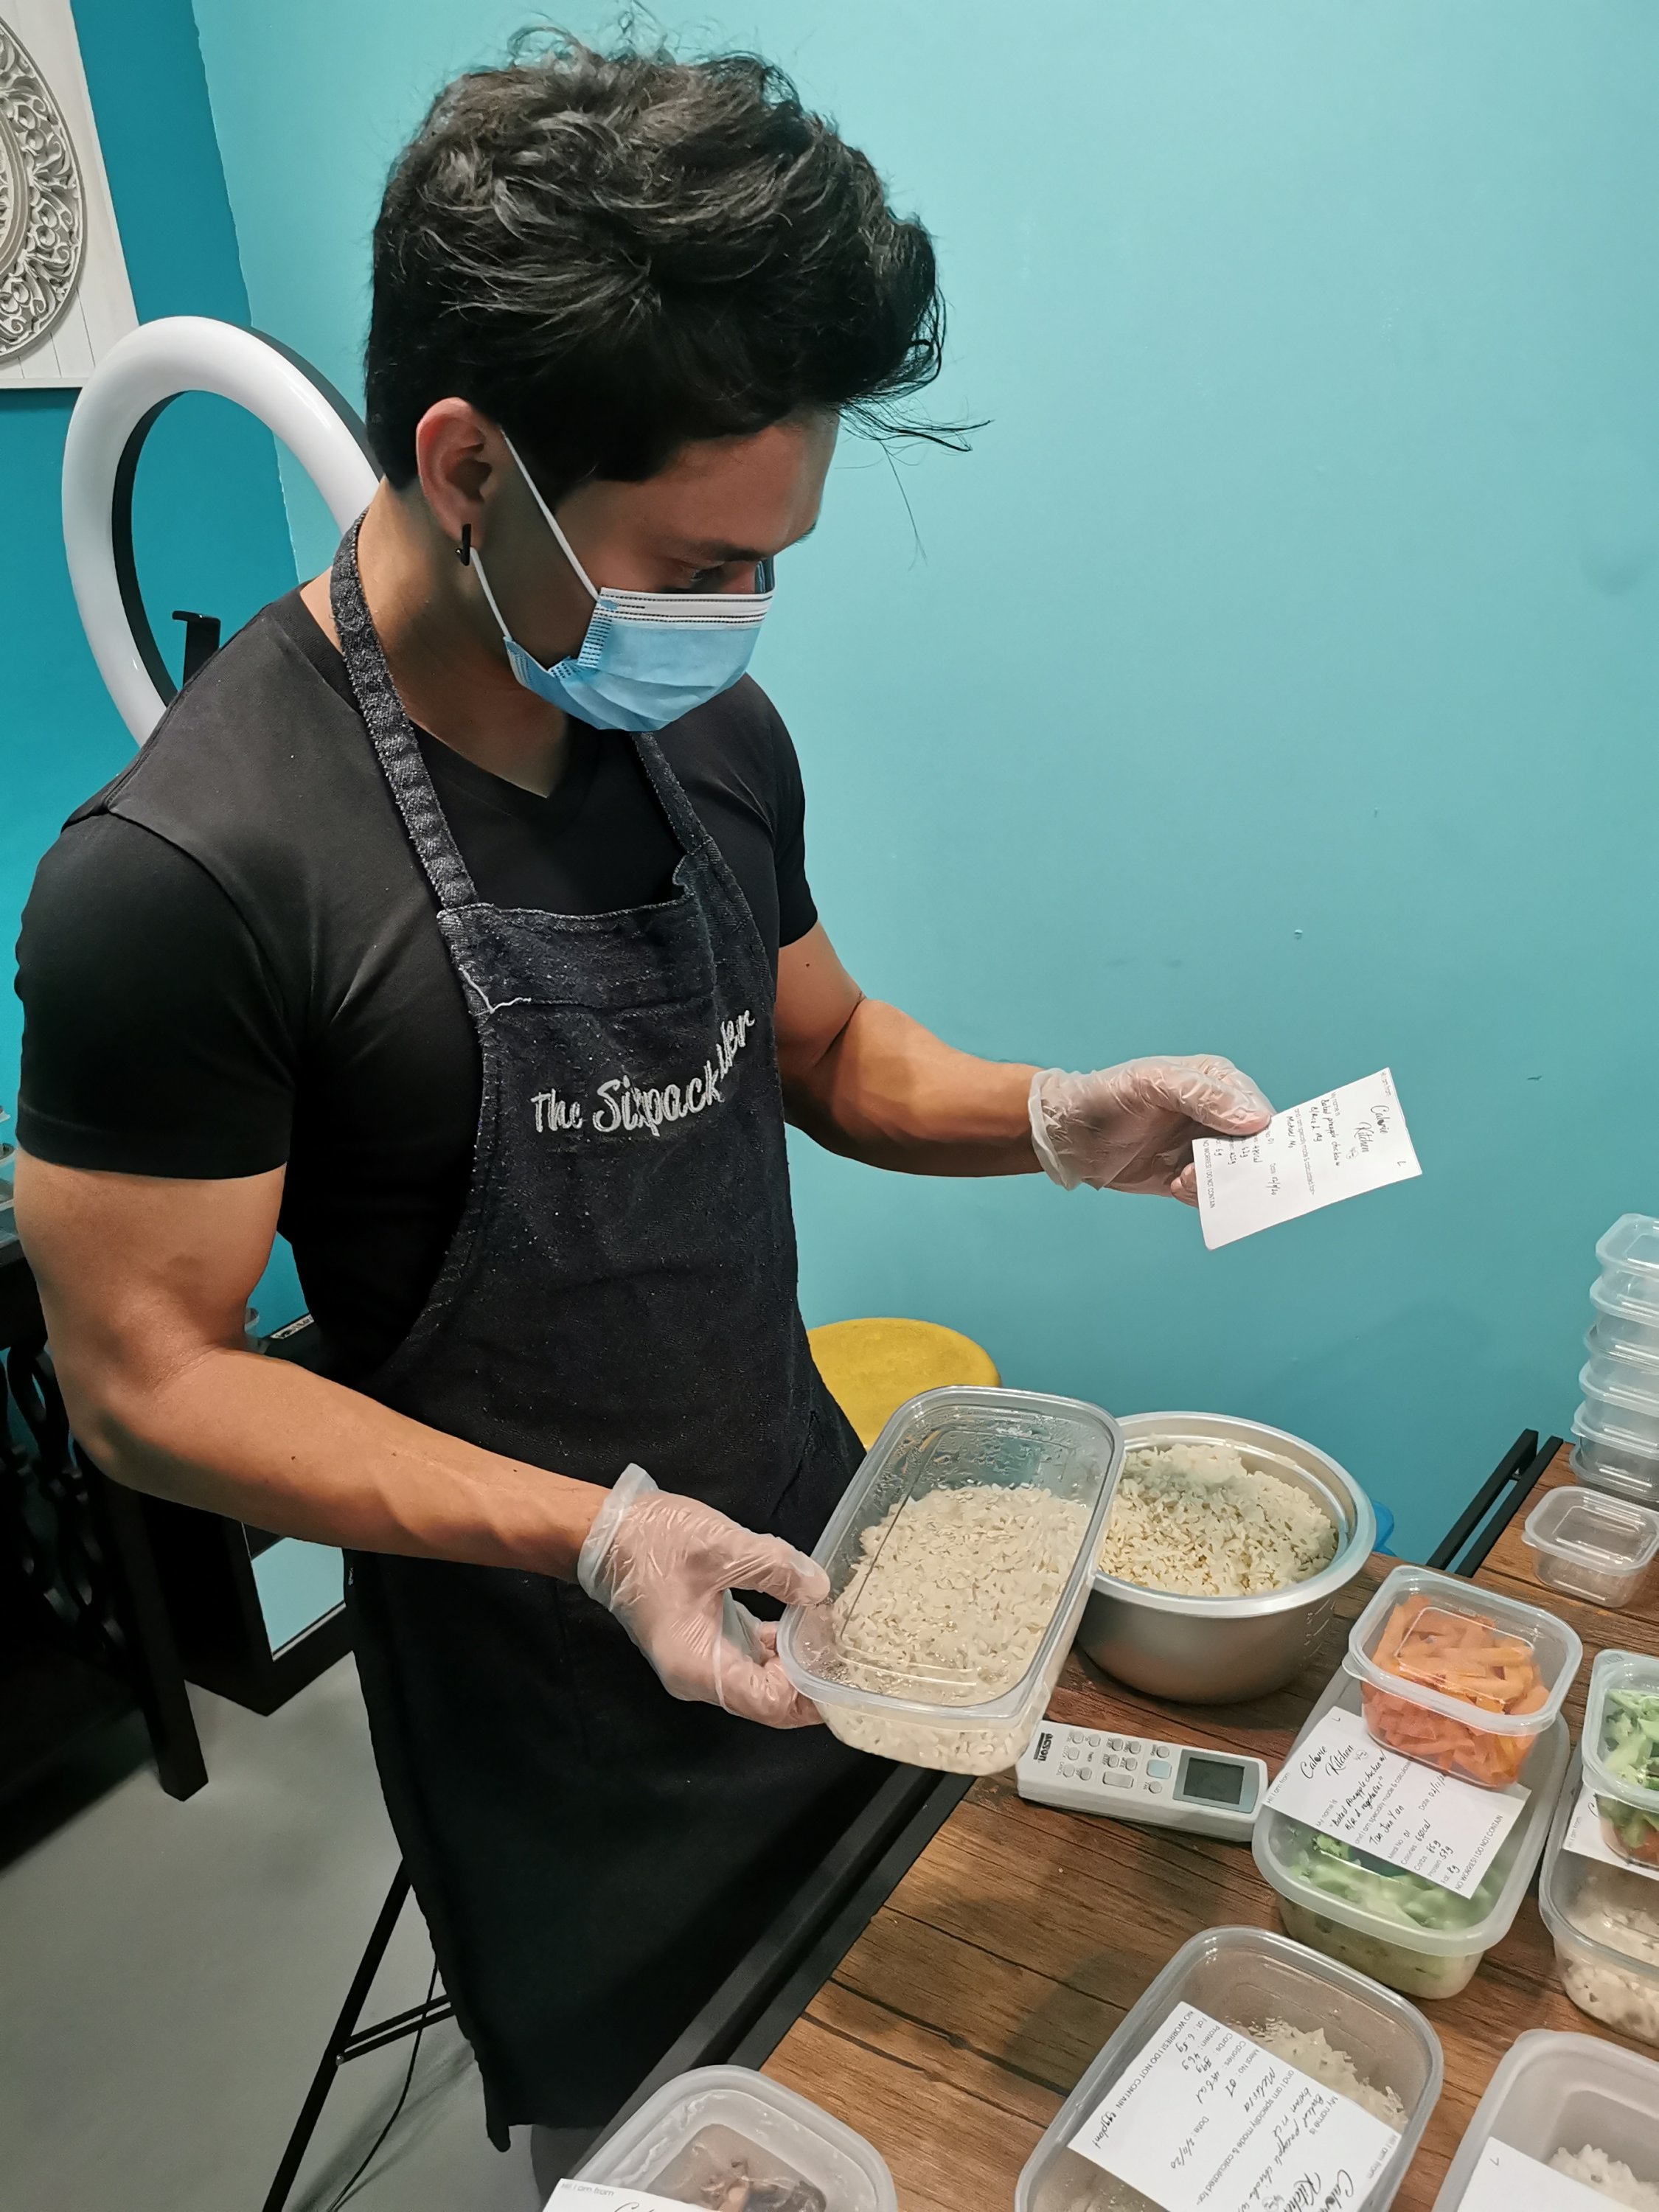 Health educator sells wholesome foods